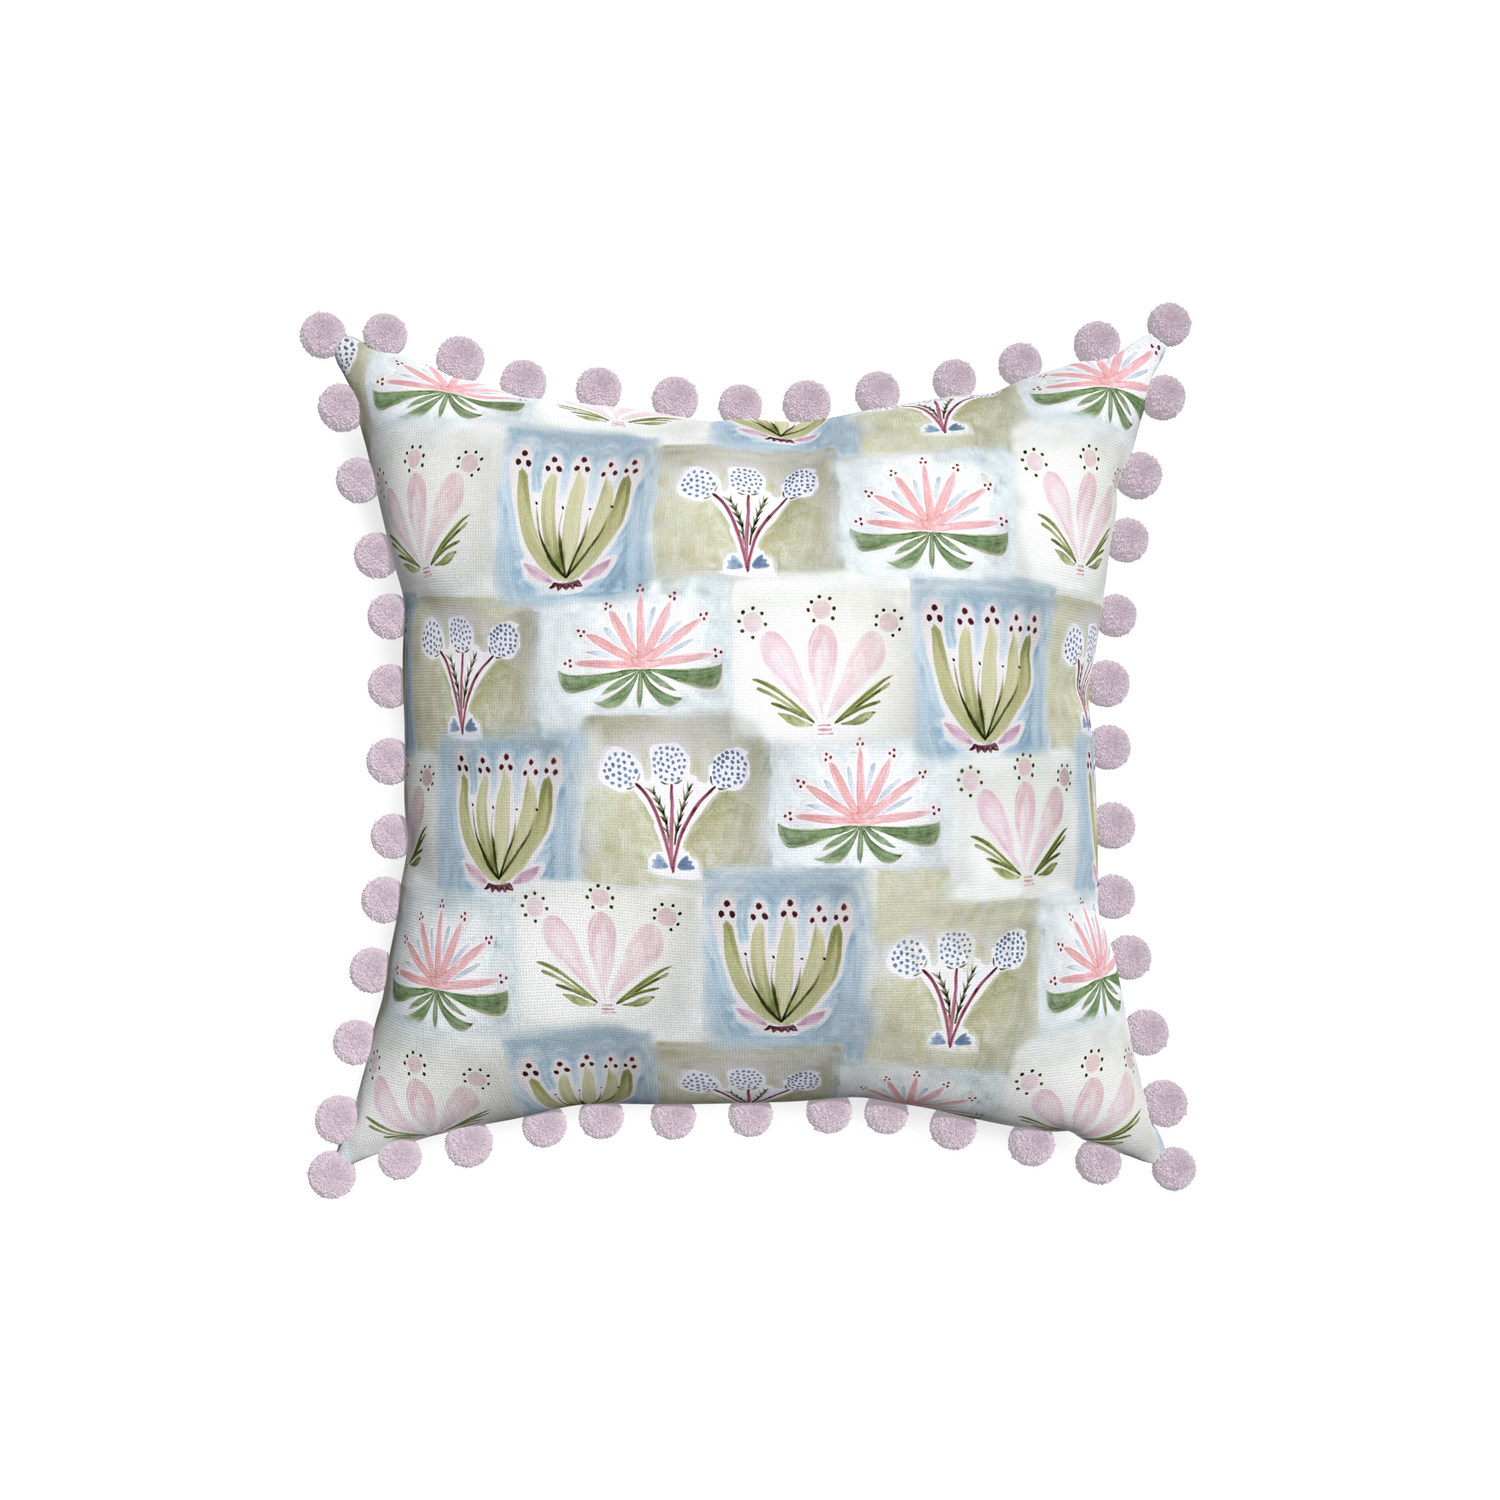 18-square harper custom hand-painted floralpillow with l on white background